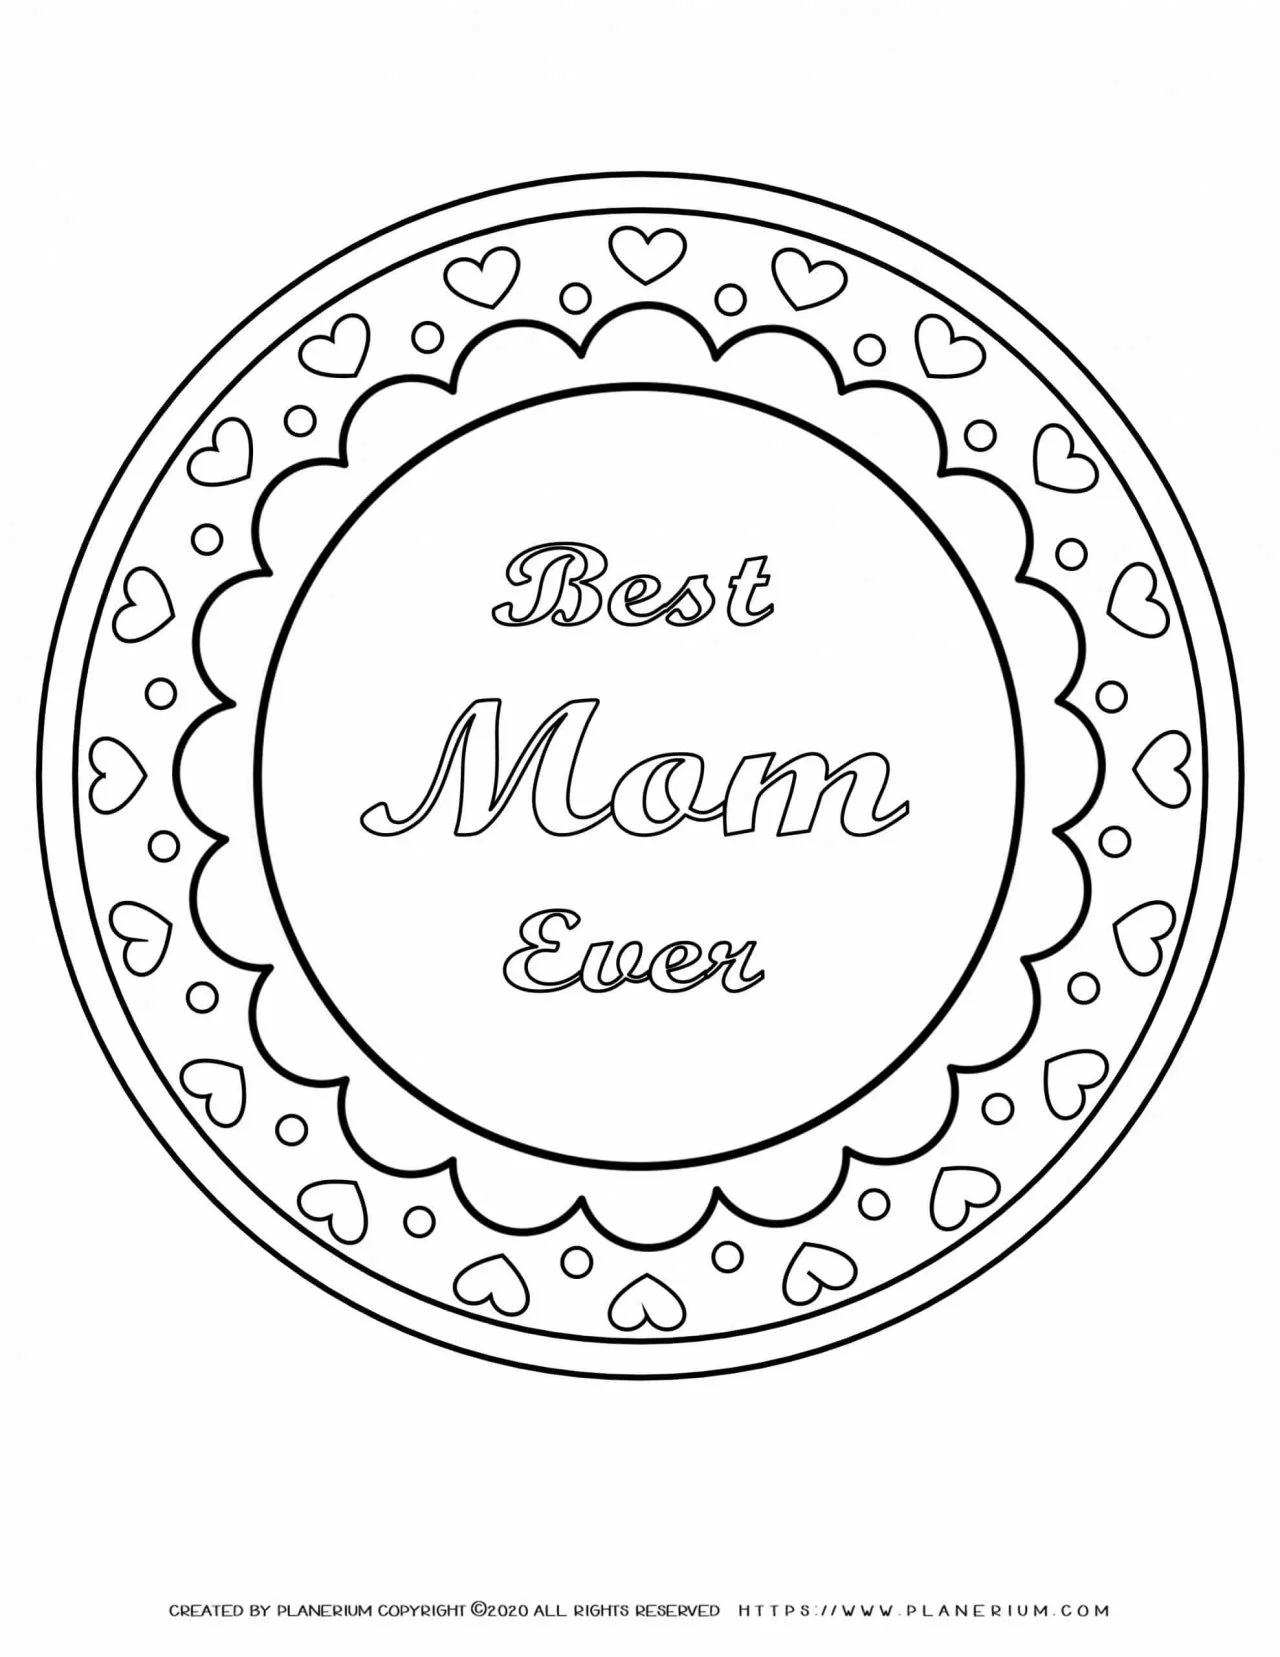 https://www.planerium.com/wp-content/uploads/2020/05/mothers-day-coloring-page-best-mom-ever-planerium-05-03-2021-1280x1657.jpg.webp